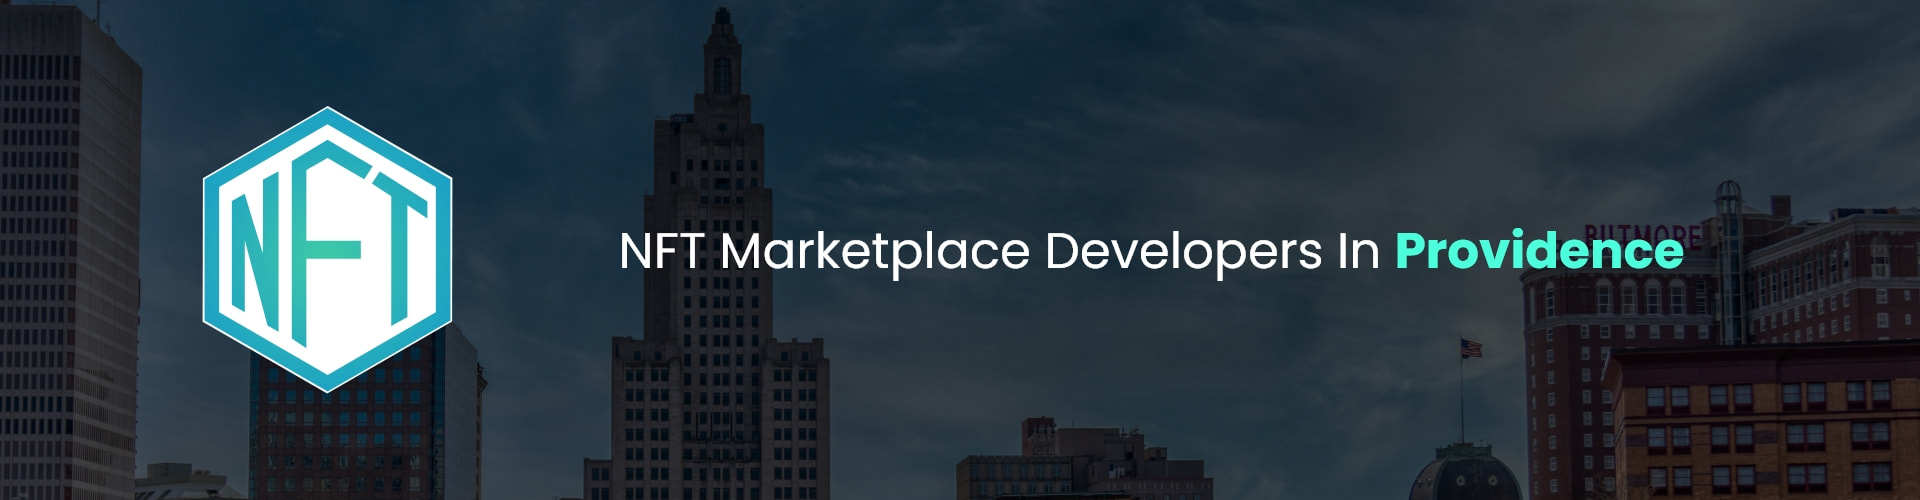 hire nft marketplace developers in providence